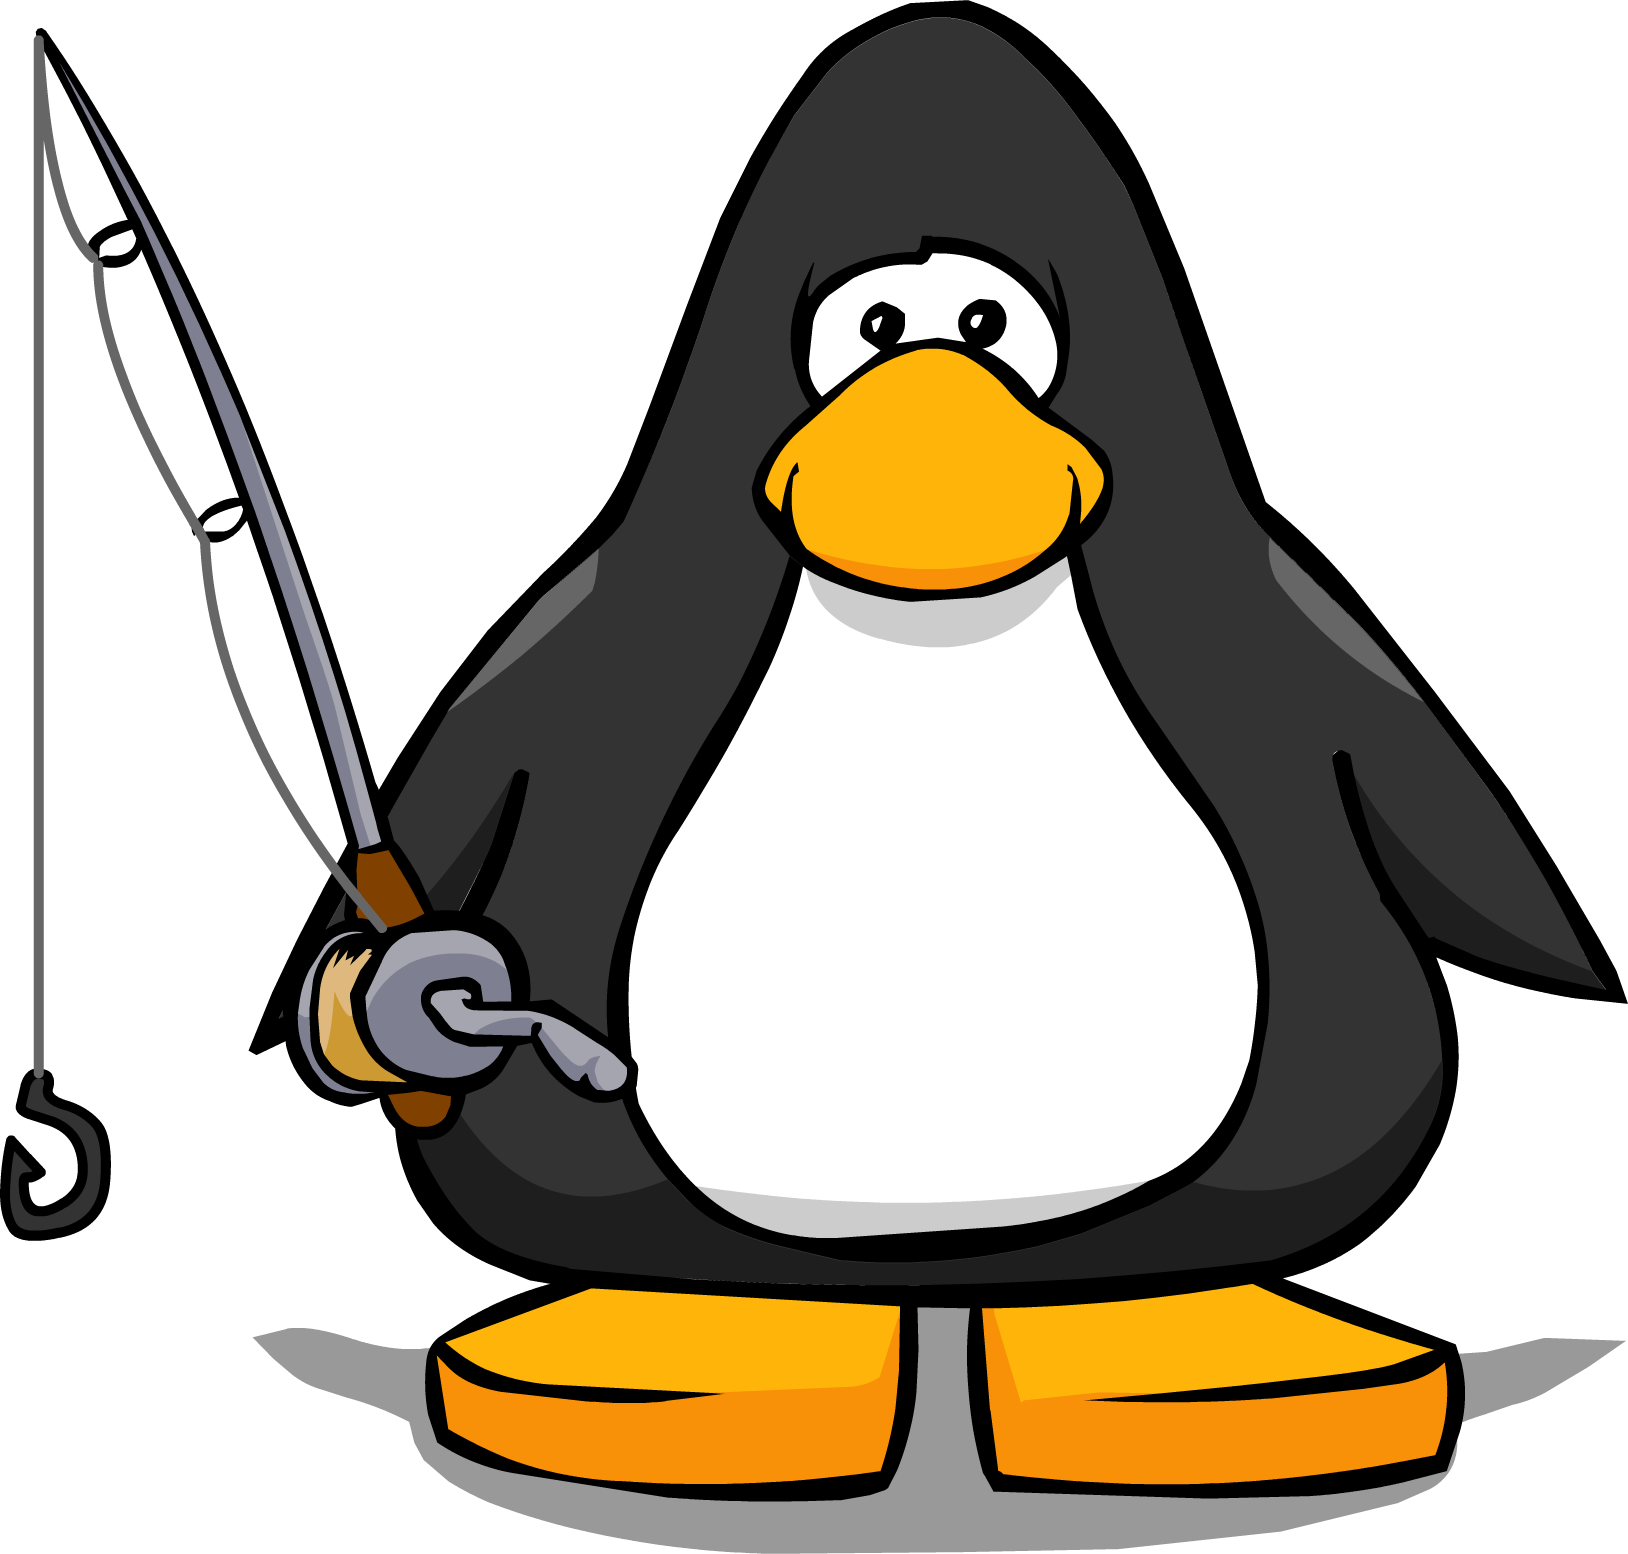 Fishing Rod From A Player Card - Club Penguin Fishing Rod (1628x1554)